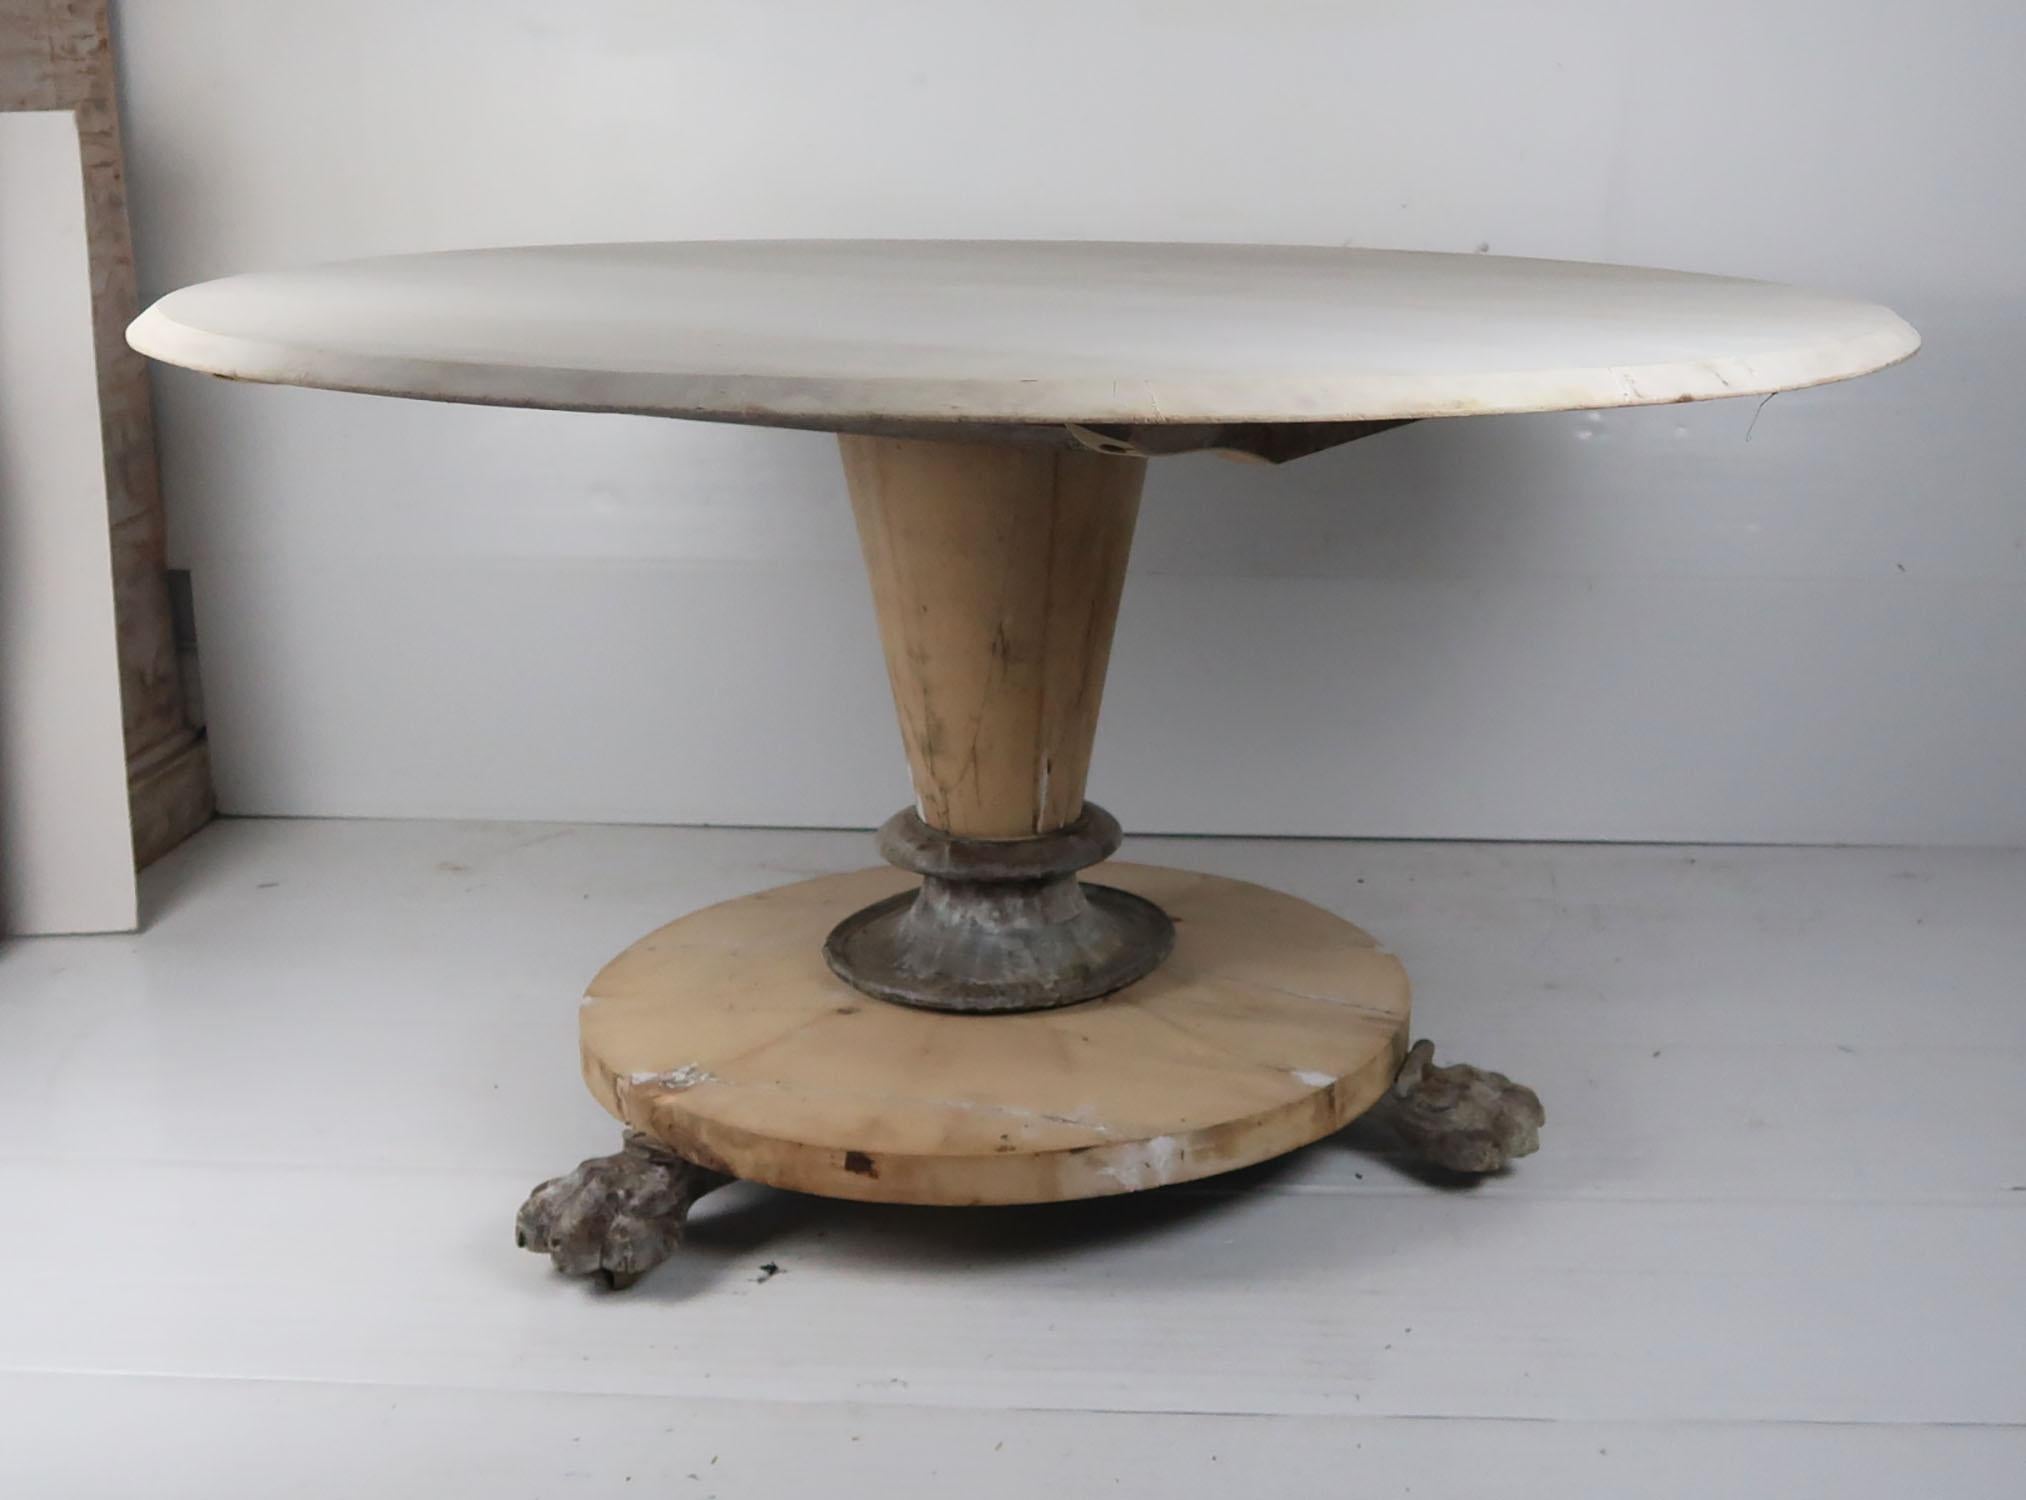 Fabulous large round Georgian table. Made from bleached Honduras mahogany and pine.

Beautifully figured top.

Great simple lines. I particularly like the plain conical shaped pedestal.

I have chosen not to lacquer or wax the